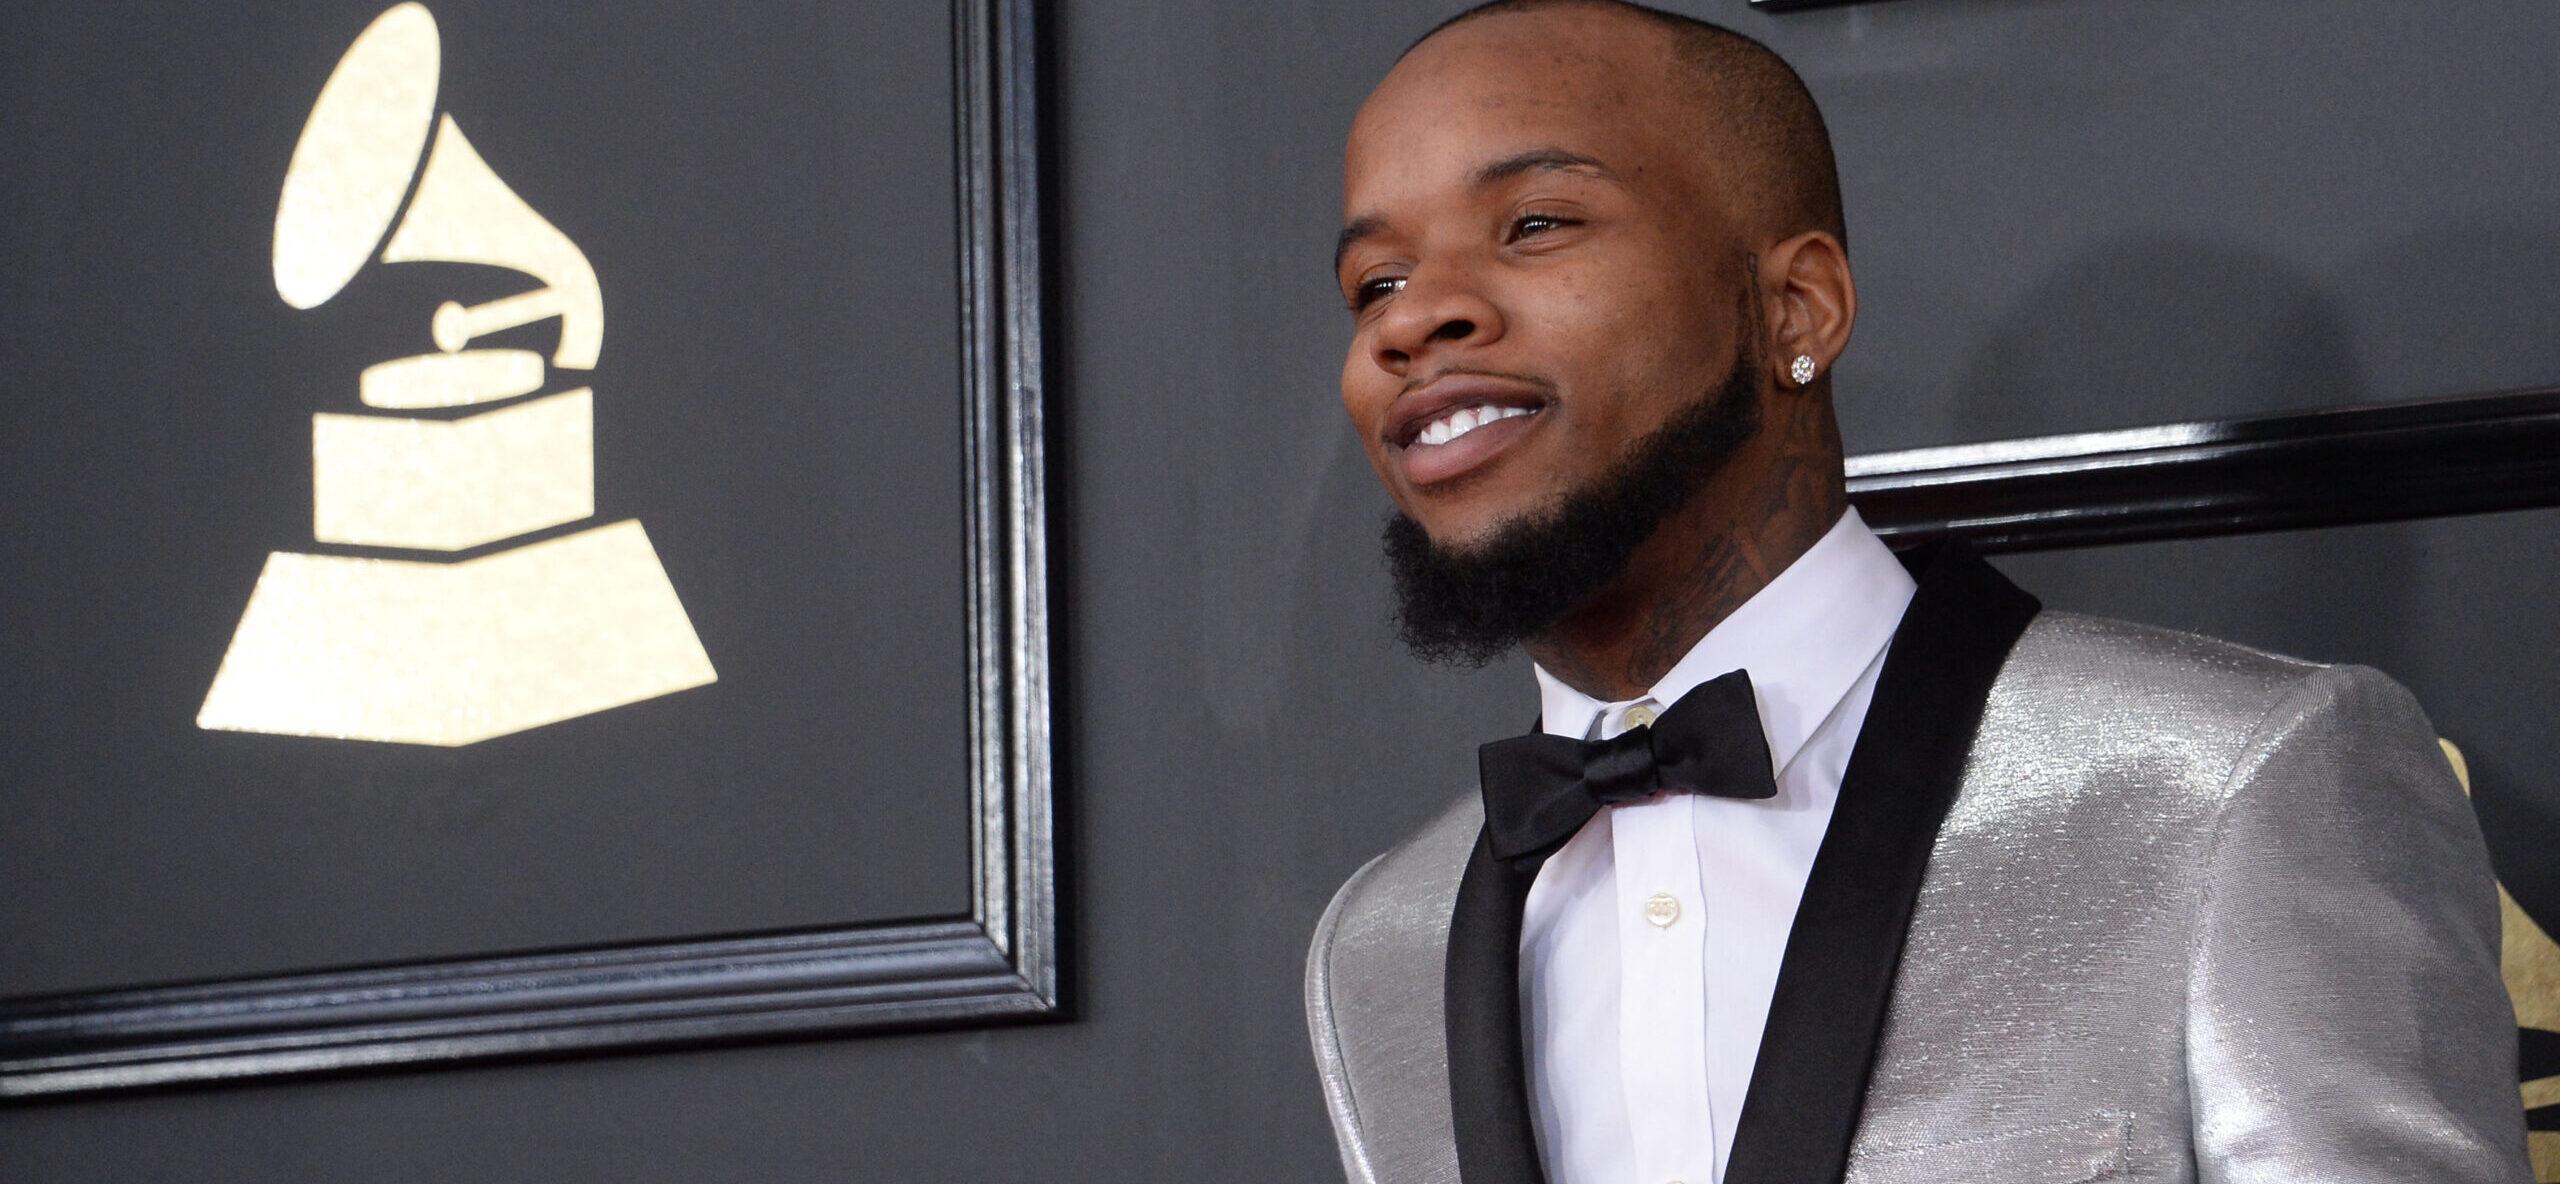 Details Of Tory Lanez’s ‘Lonely’ Life In State Prison Revealed